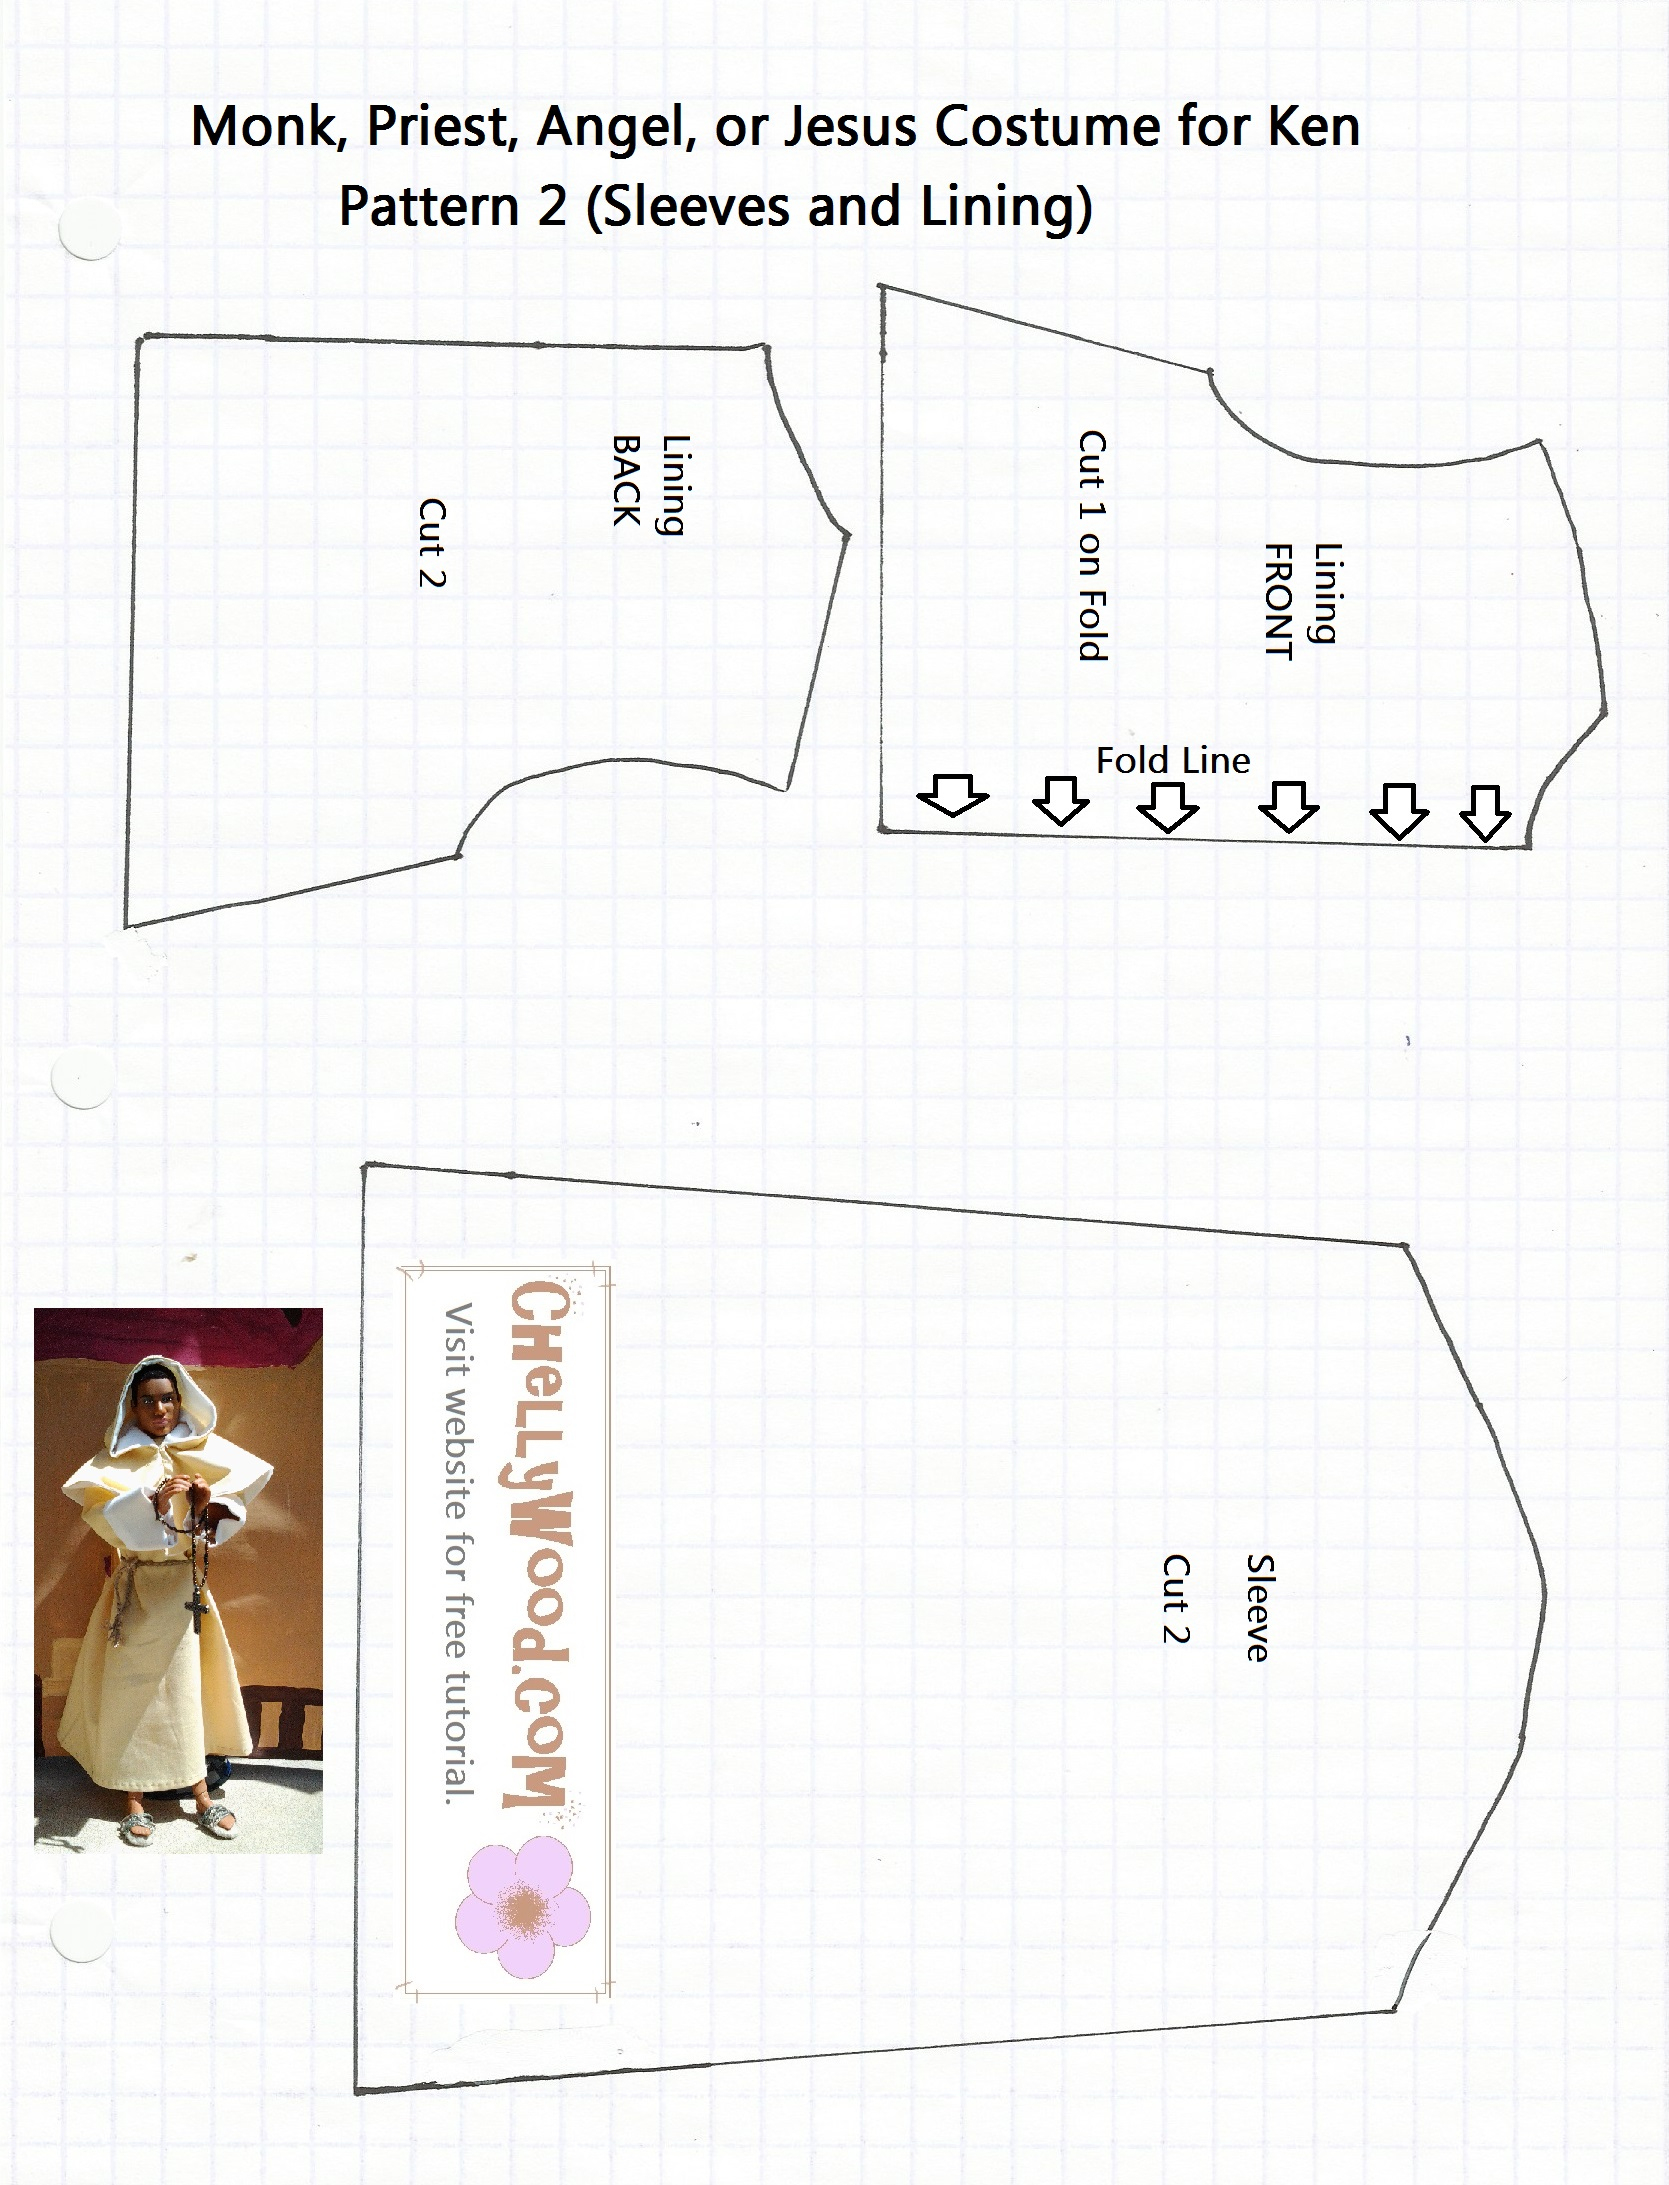 Free Printable Barbie Doll Clothes Patterns – Chellywood - Free Printable Barbie Doll Sewing Patterns Template